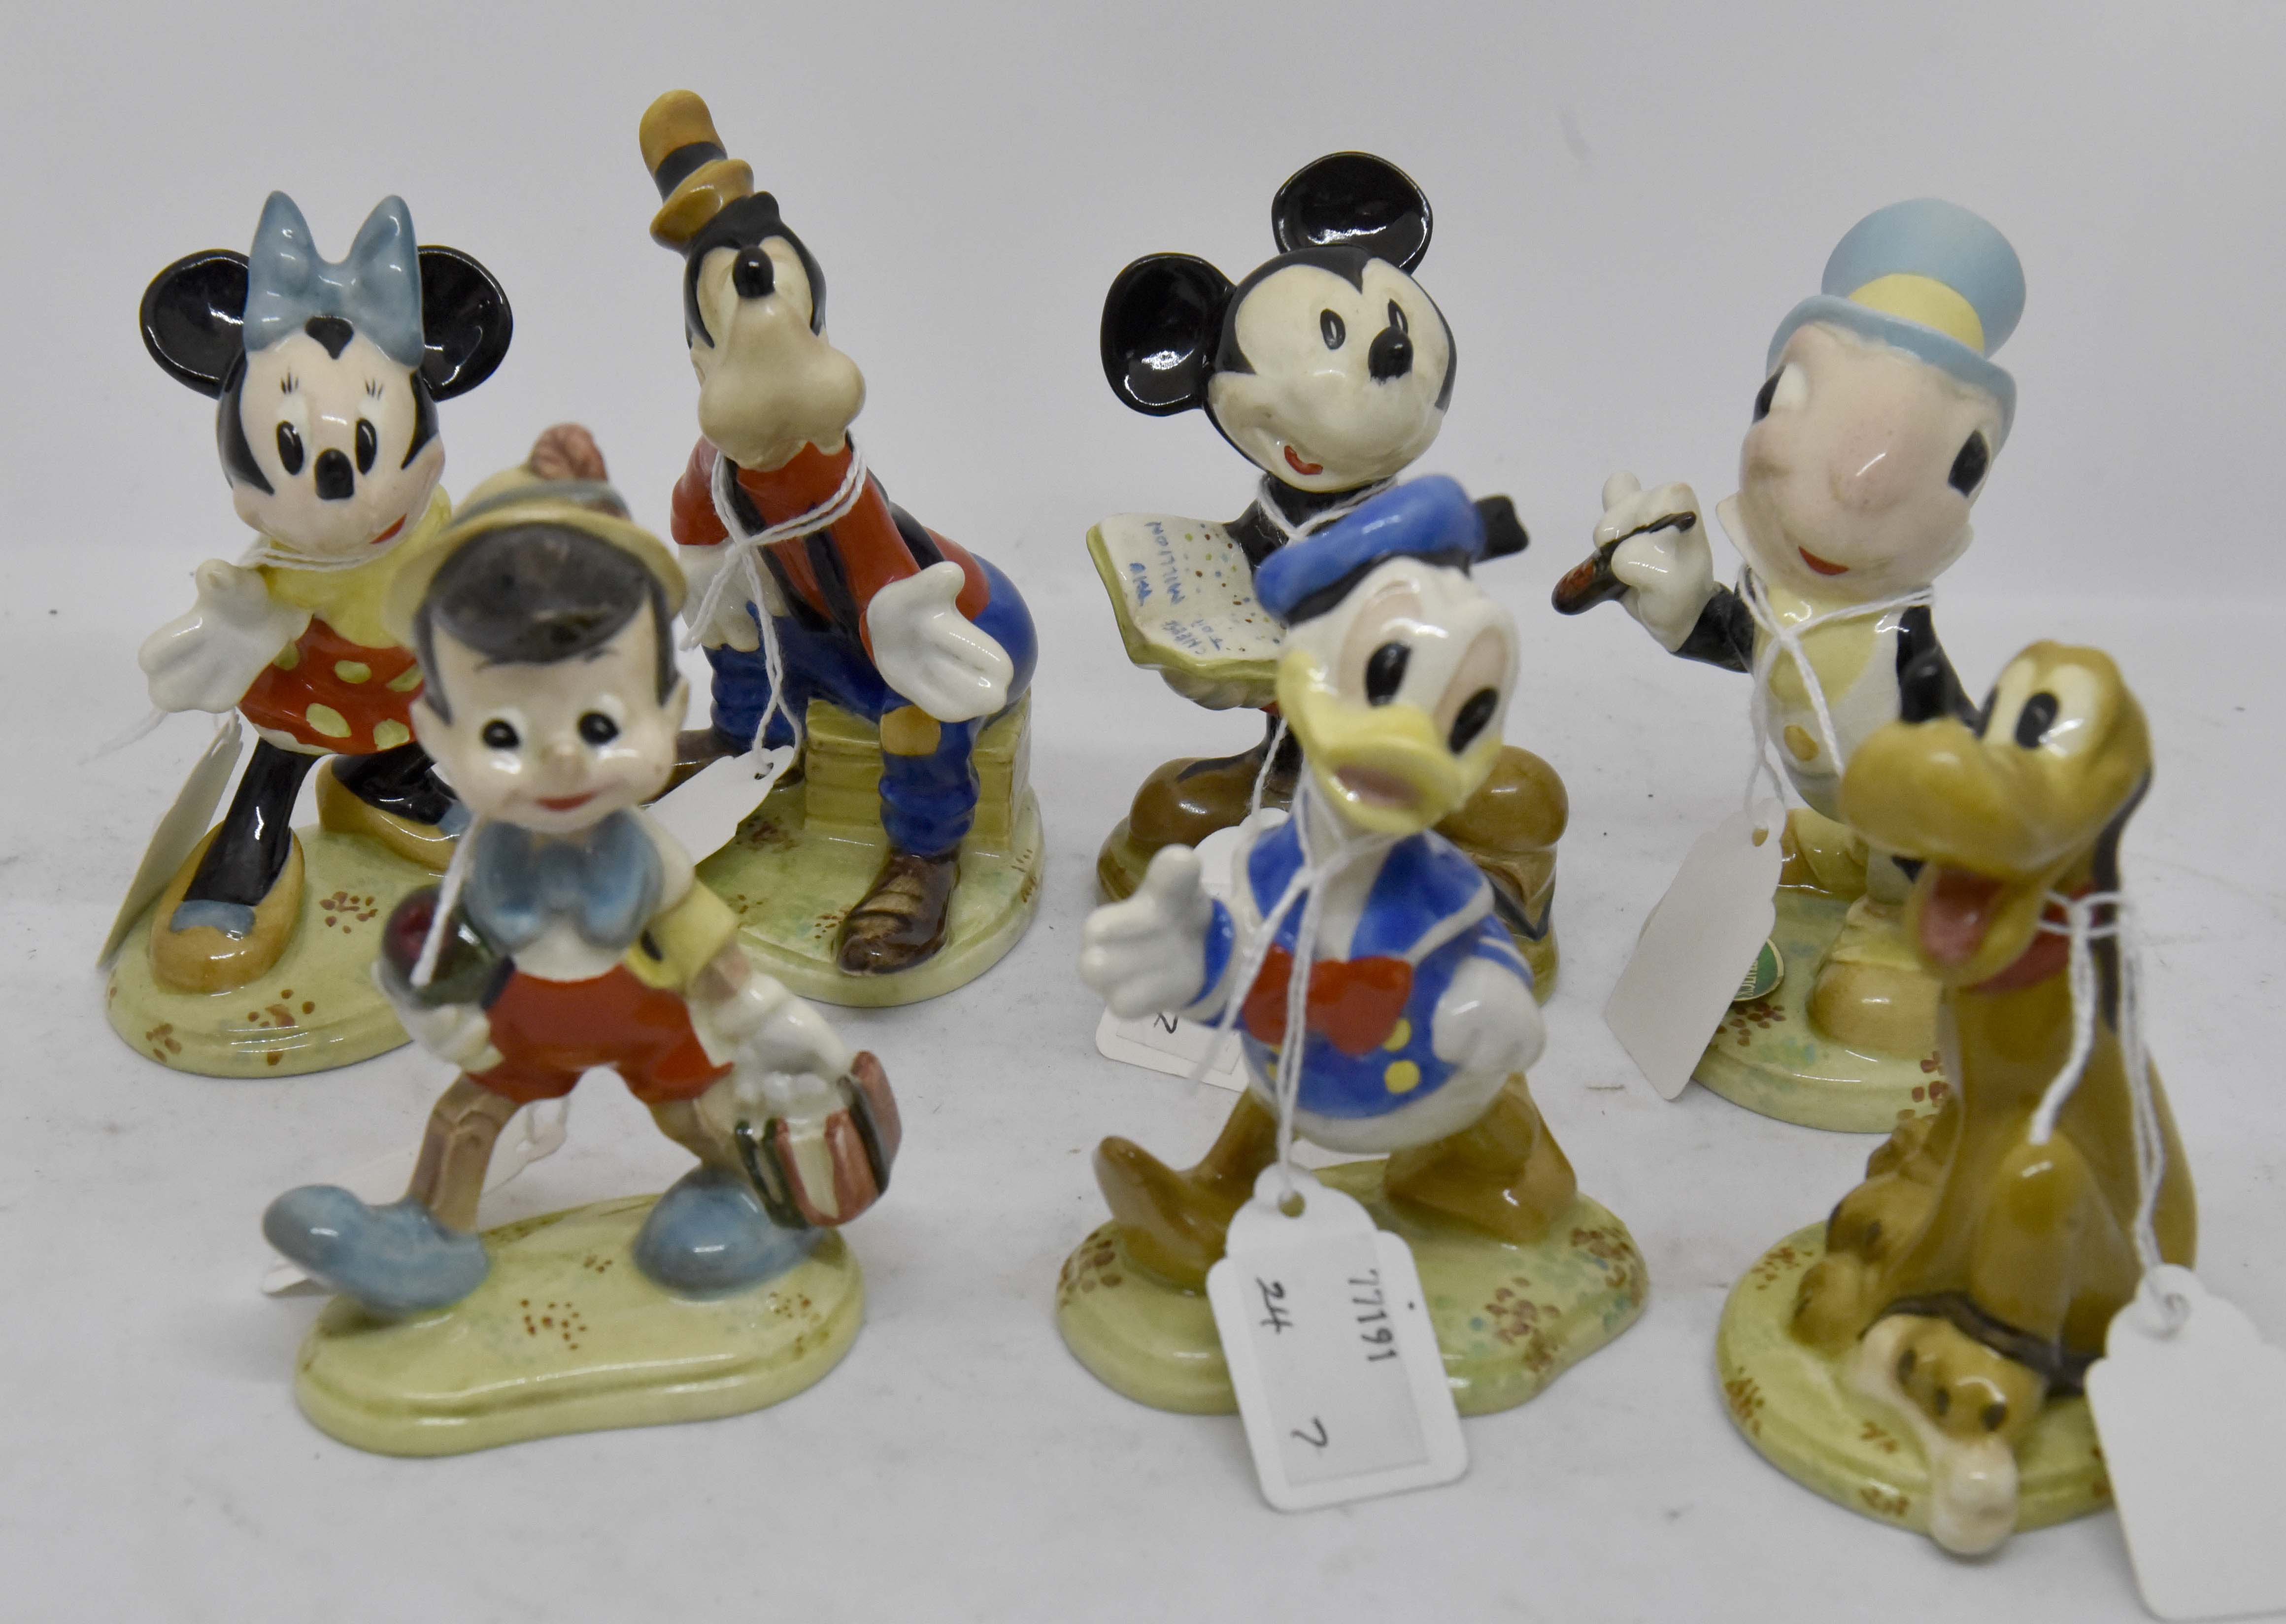 Beswick Walt Disney series figures including; Mickey Mouse, Minnie Mouse, Goofy, Pluto, Donald Duck,